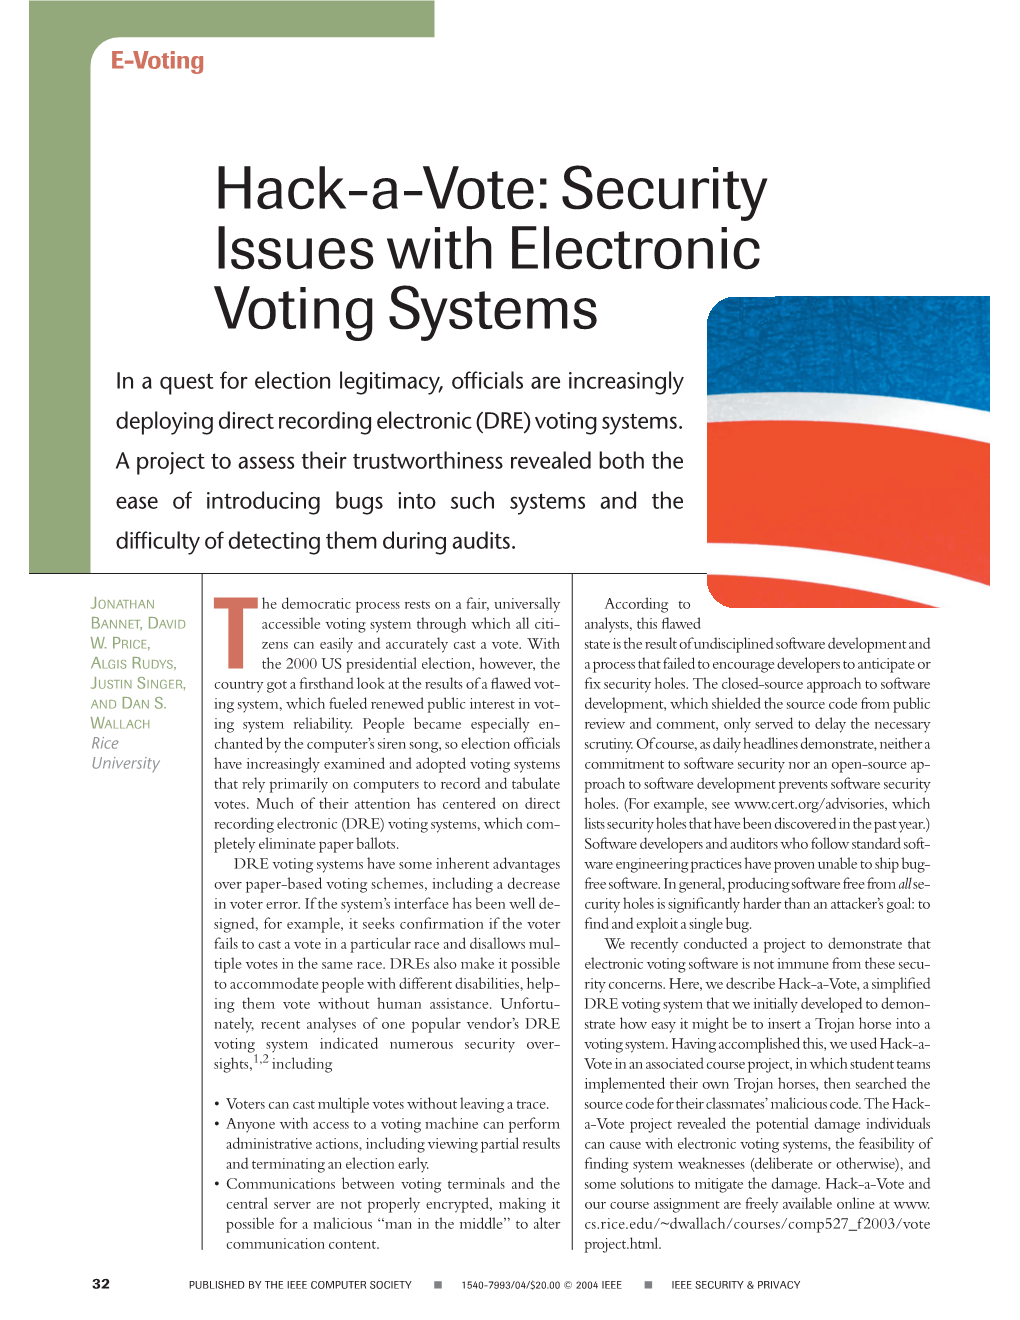 Hack-A-Vote: Security Issues with Electronic Voting Systems